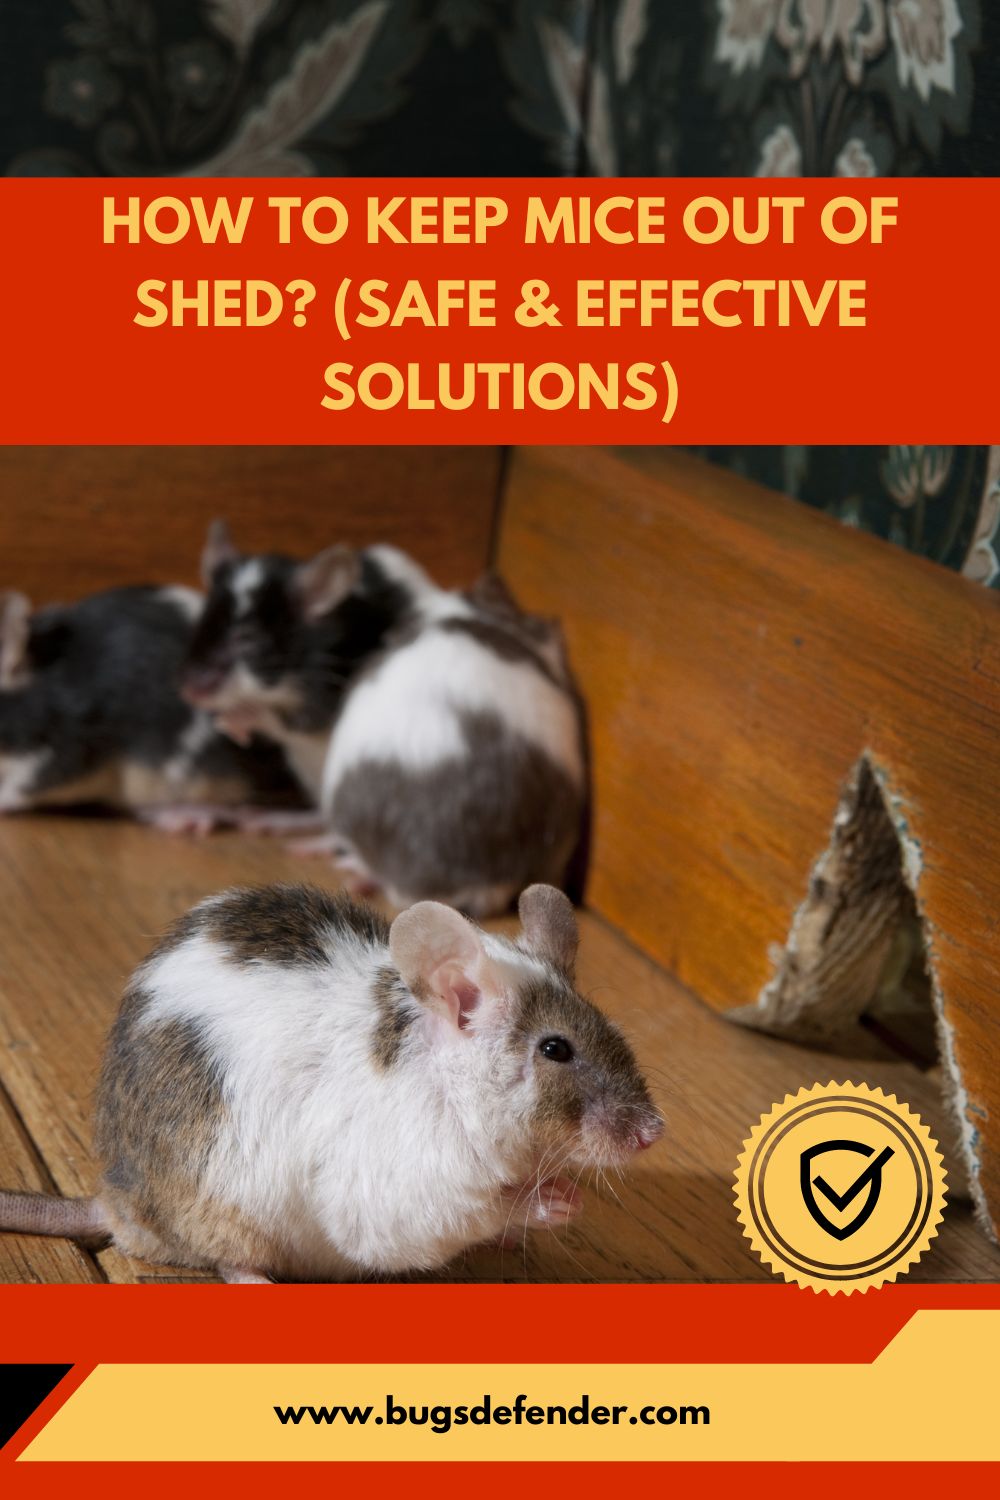 How to Keep Mice Out of Shed pin1